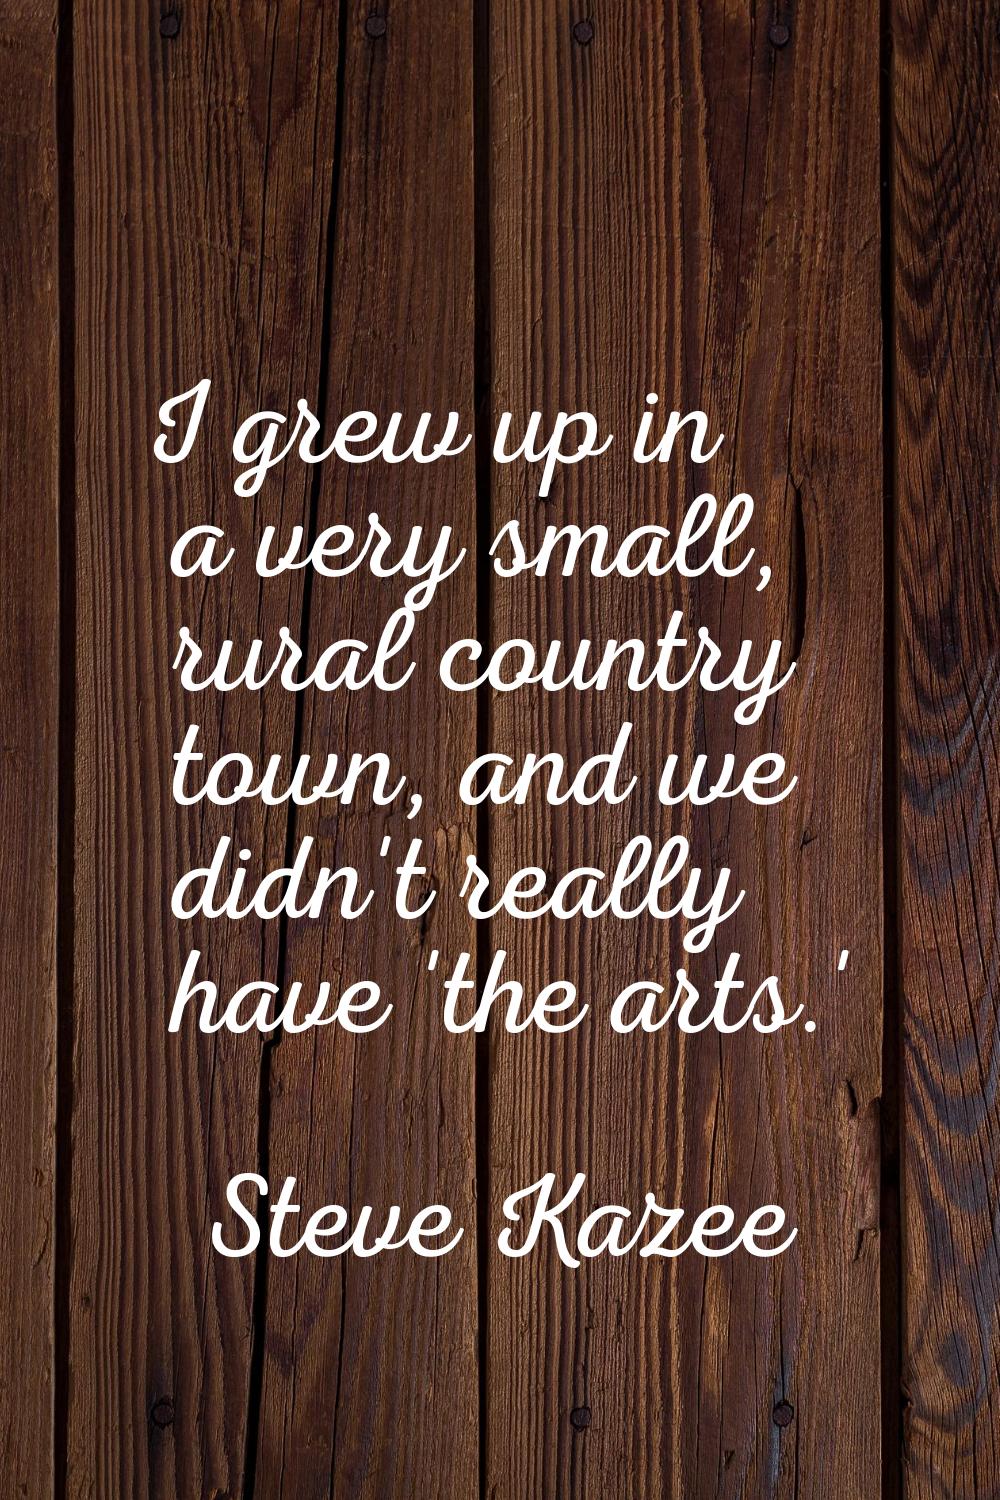 I grew up in a very small, rural country town, and we didn't really have 'the arts.'